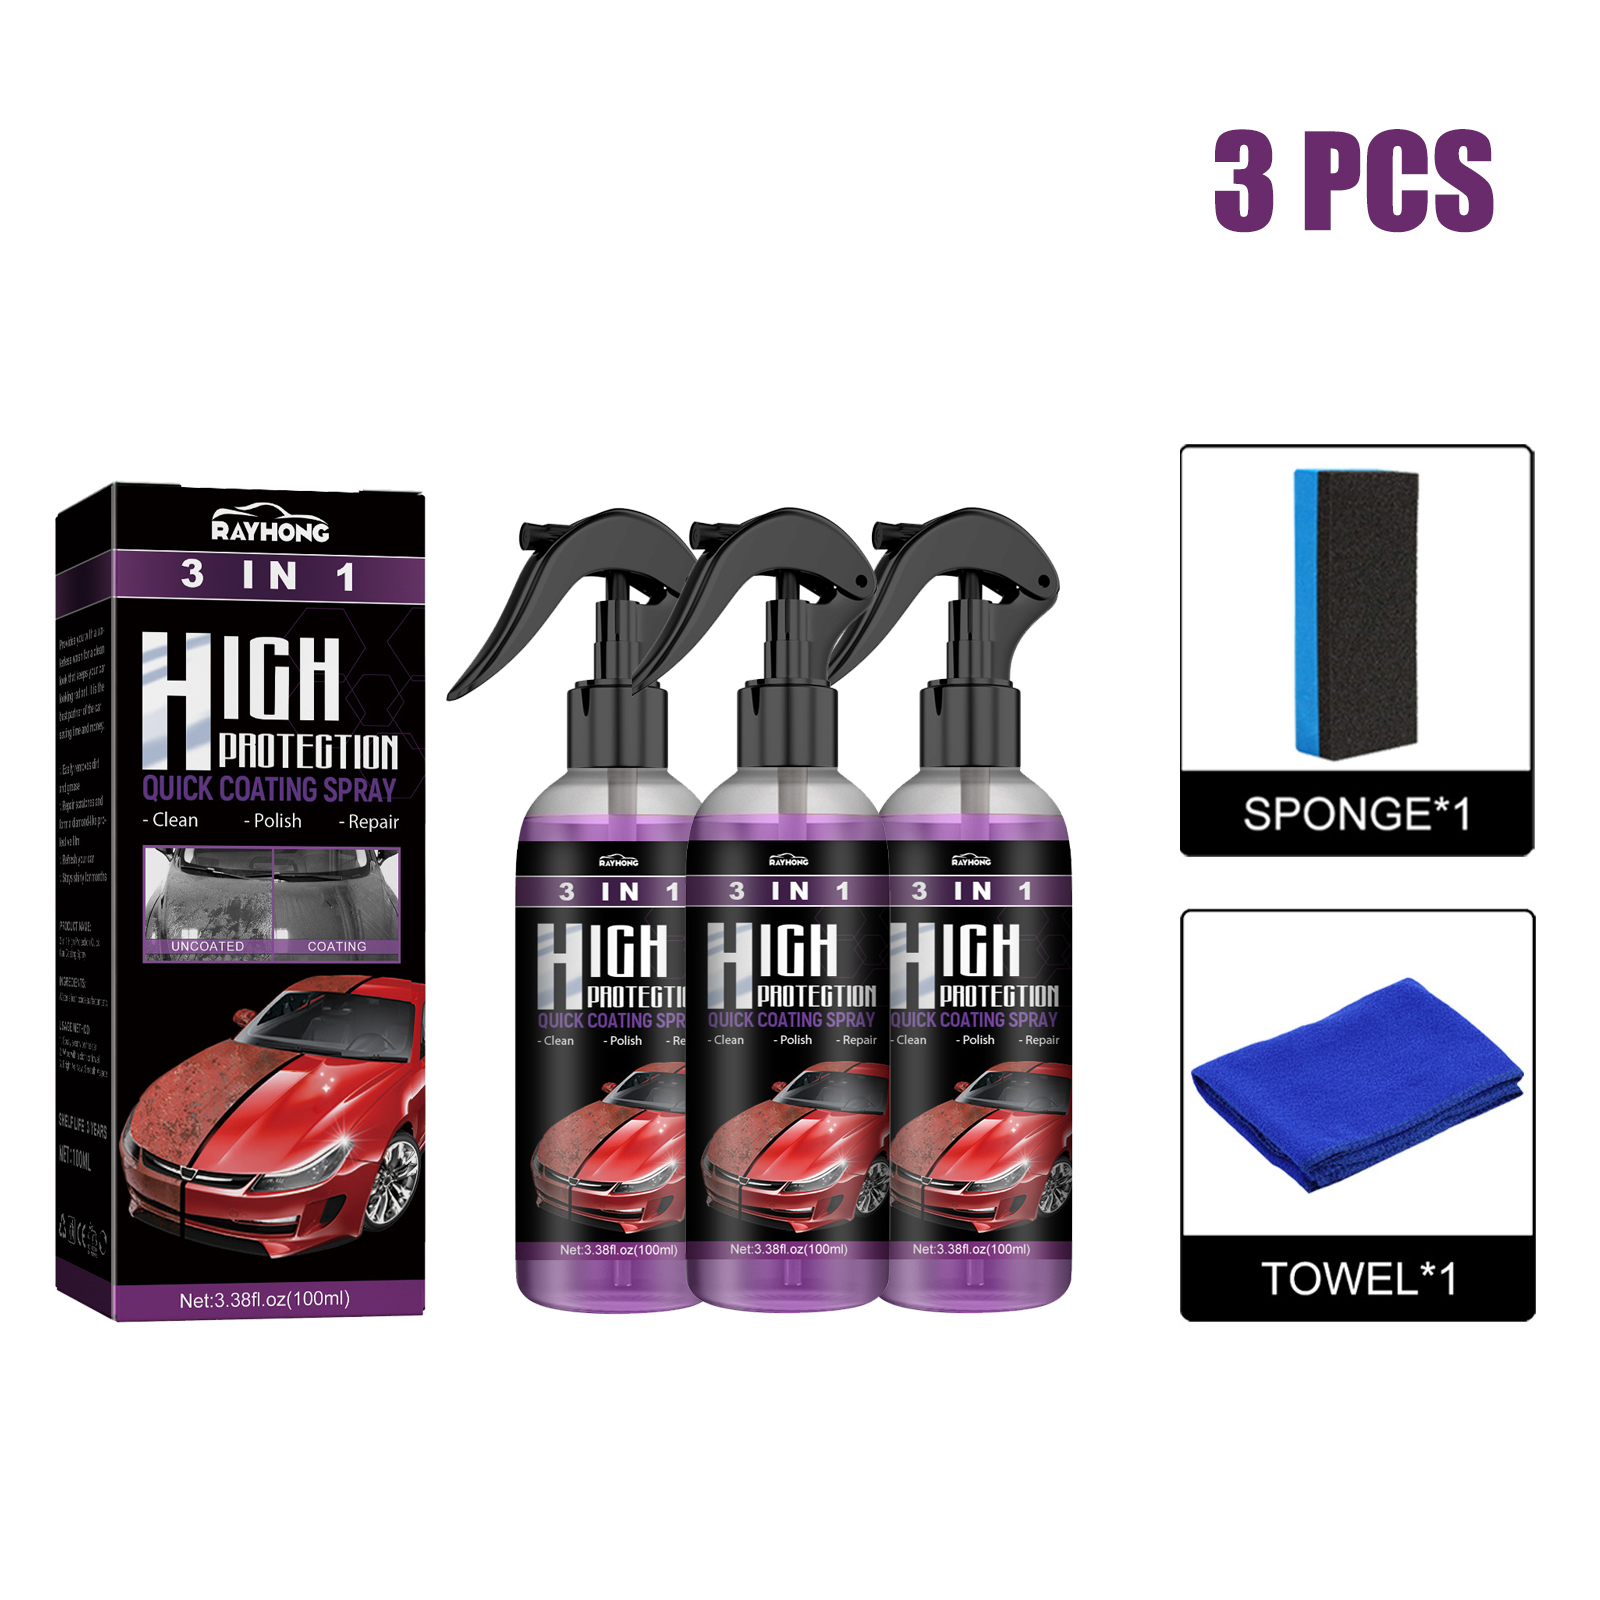 2 Pcs Multi-Functional Coating Renewal Agent, 3 in 1 Ceramic Car Coating  Spray, 3 in 1 High Protection Quick Car Coating Spray, Plastic Parts